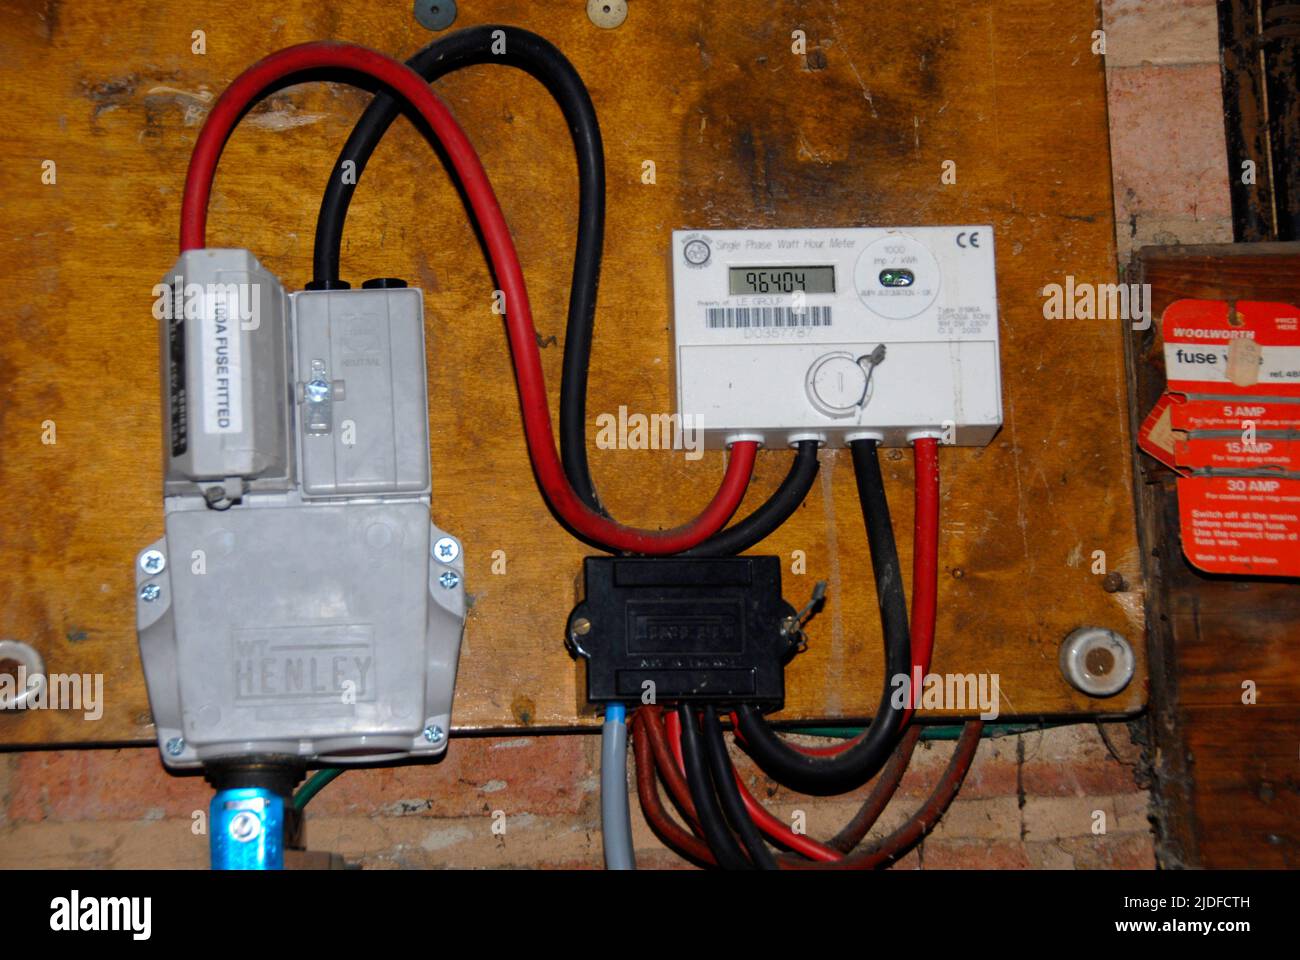 Electricity meter and ancillary equipment in domestic situation Stock Photo